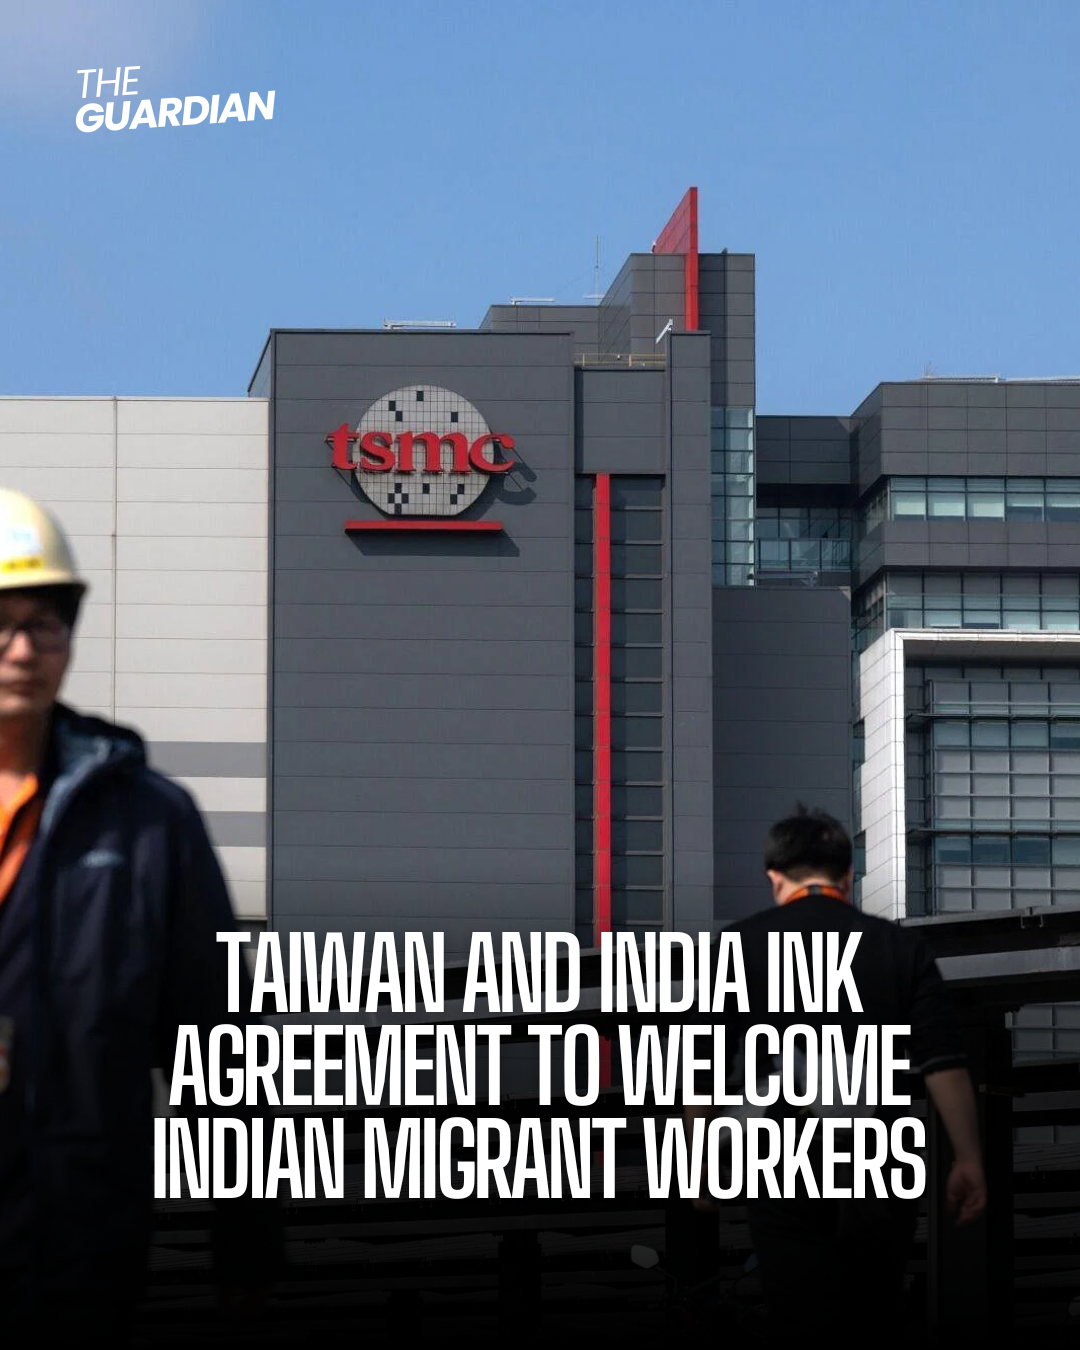 Taiwan and India reached an agreement on Friday to bring Indian migrant labourers to the island.